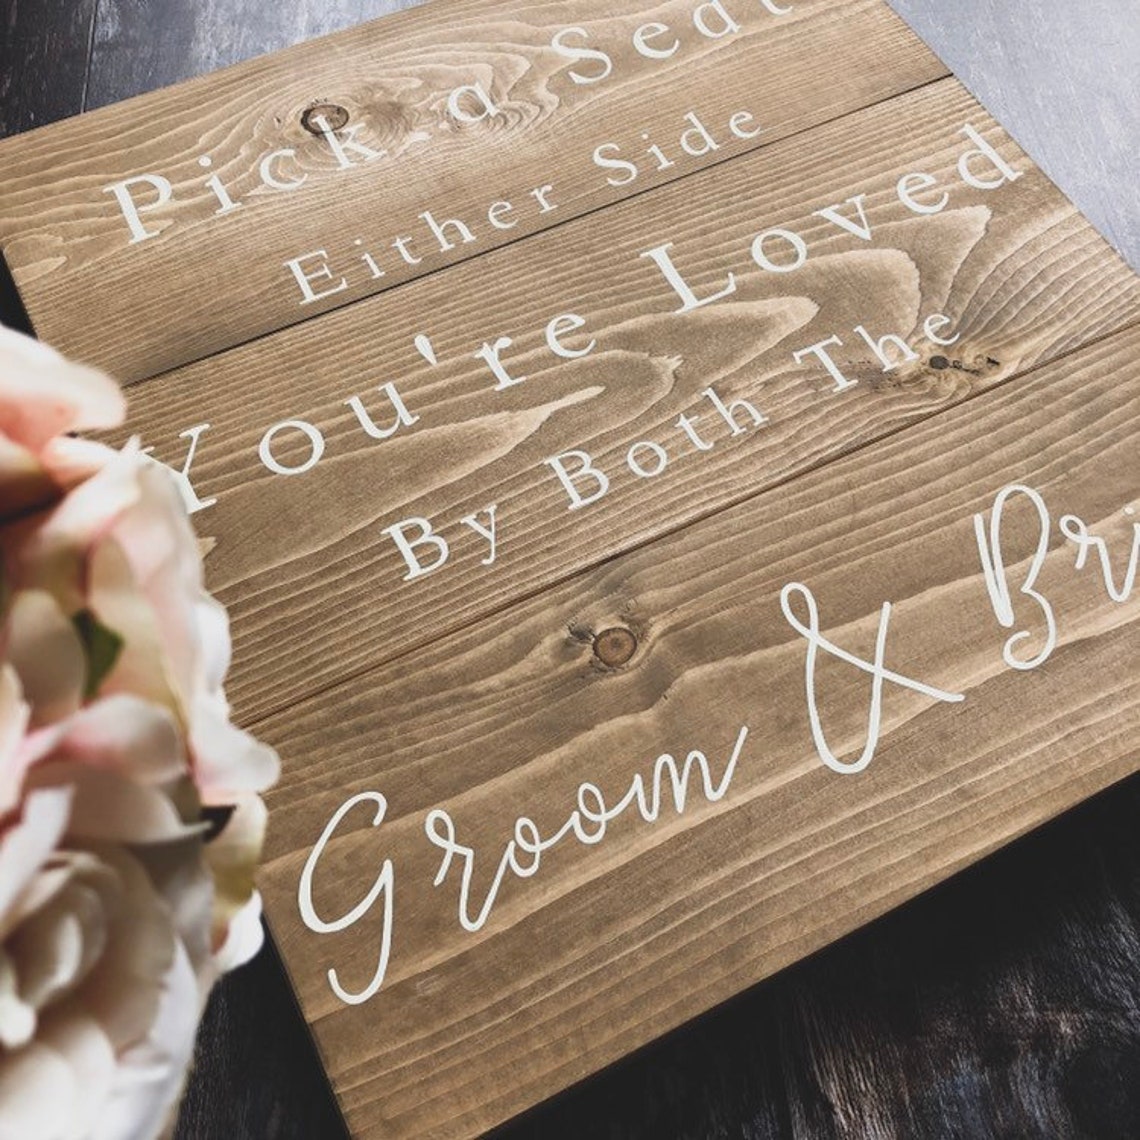 pick-a-seat-either-side-you-re-loved-by-both-the-groom-and-etsy